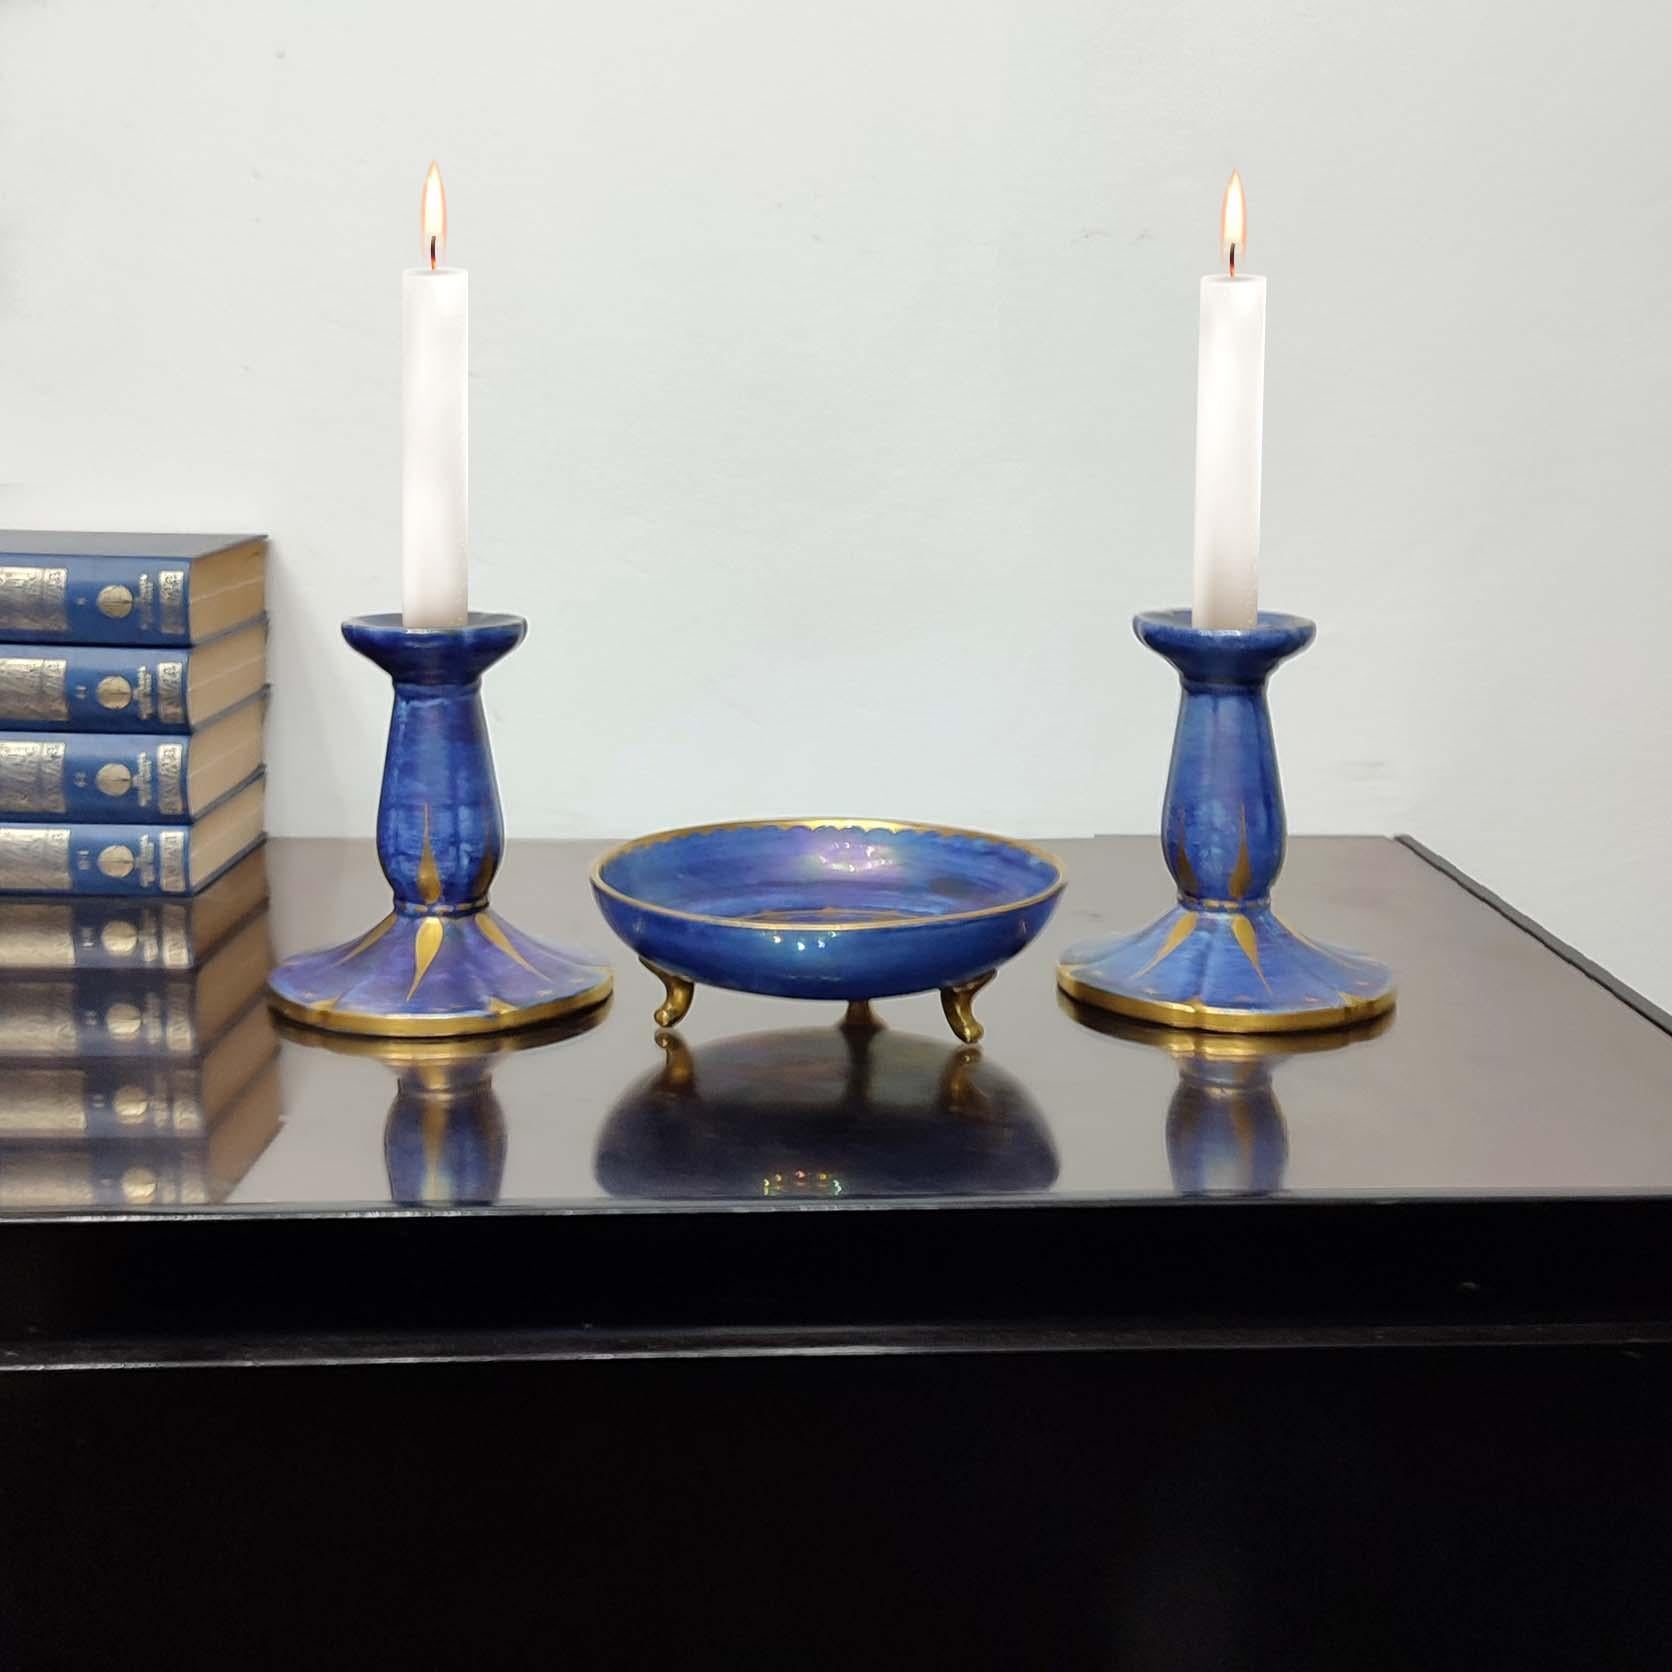 Josef Ekberg for Gustavsberg, Sweden 1931. 
A pair of Art Deco exquisite candlesticks and a three feet vide-poche in glazed ceramics, rare find.
Beautiful blue-purplish glaze and gold decoration, 1931. Manufacturer stamp and artist signature to